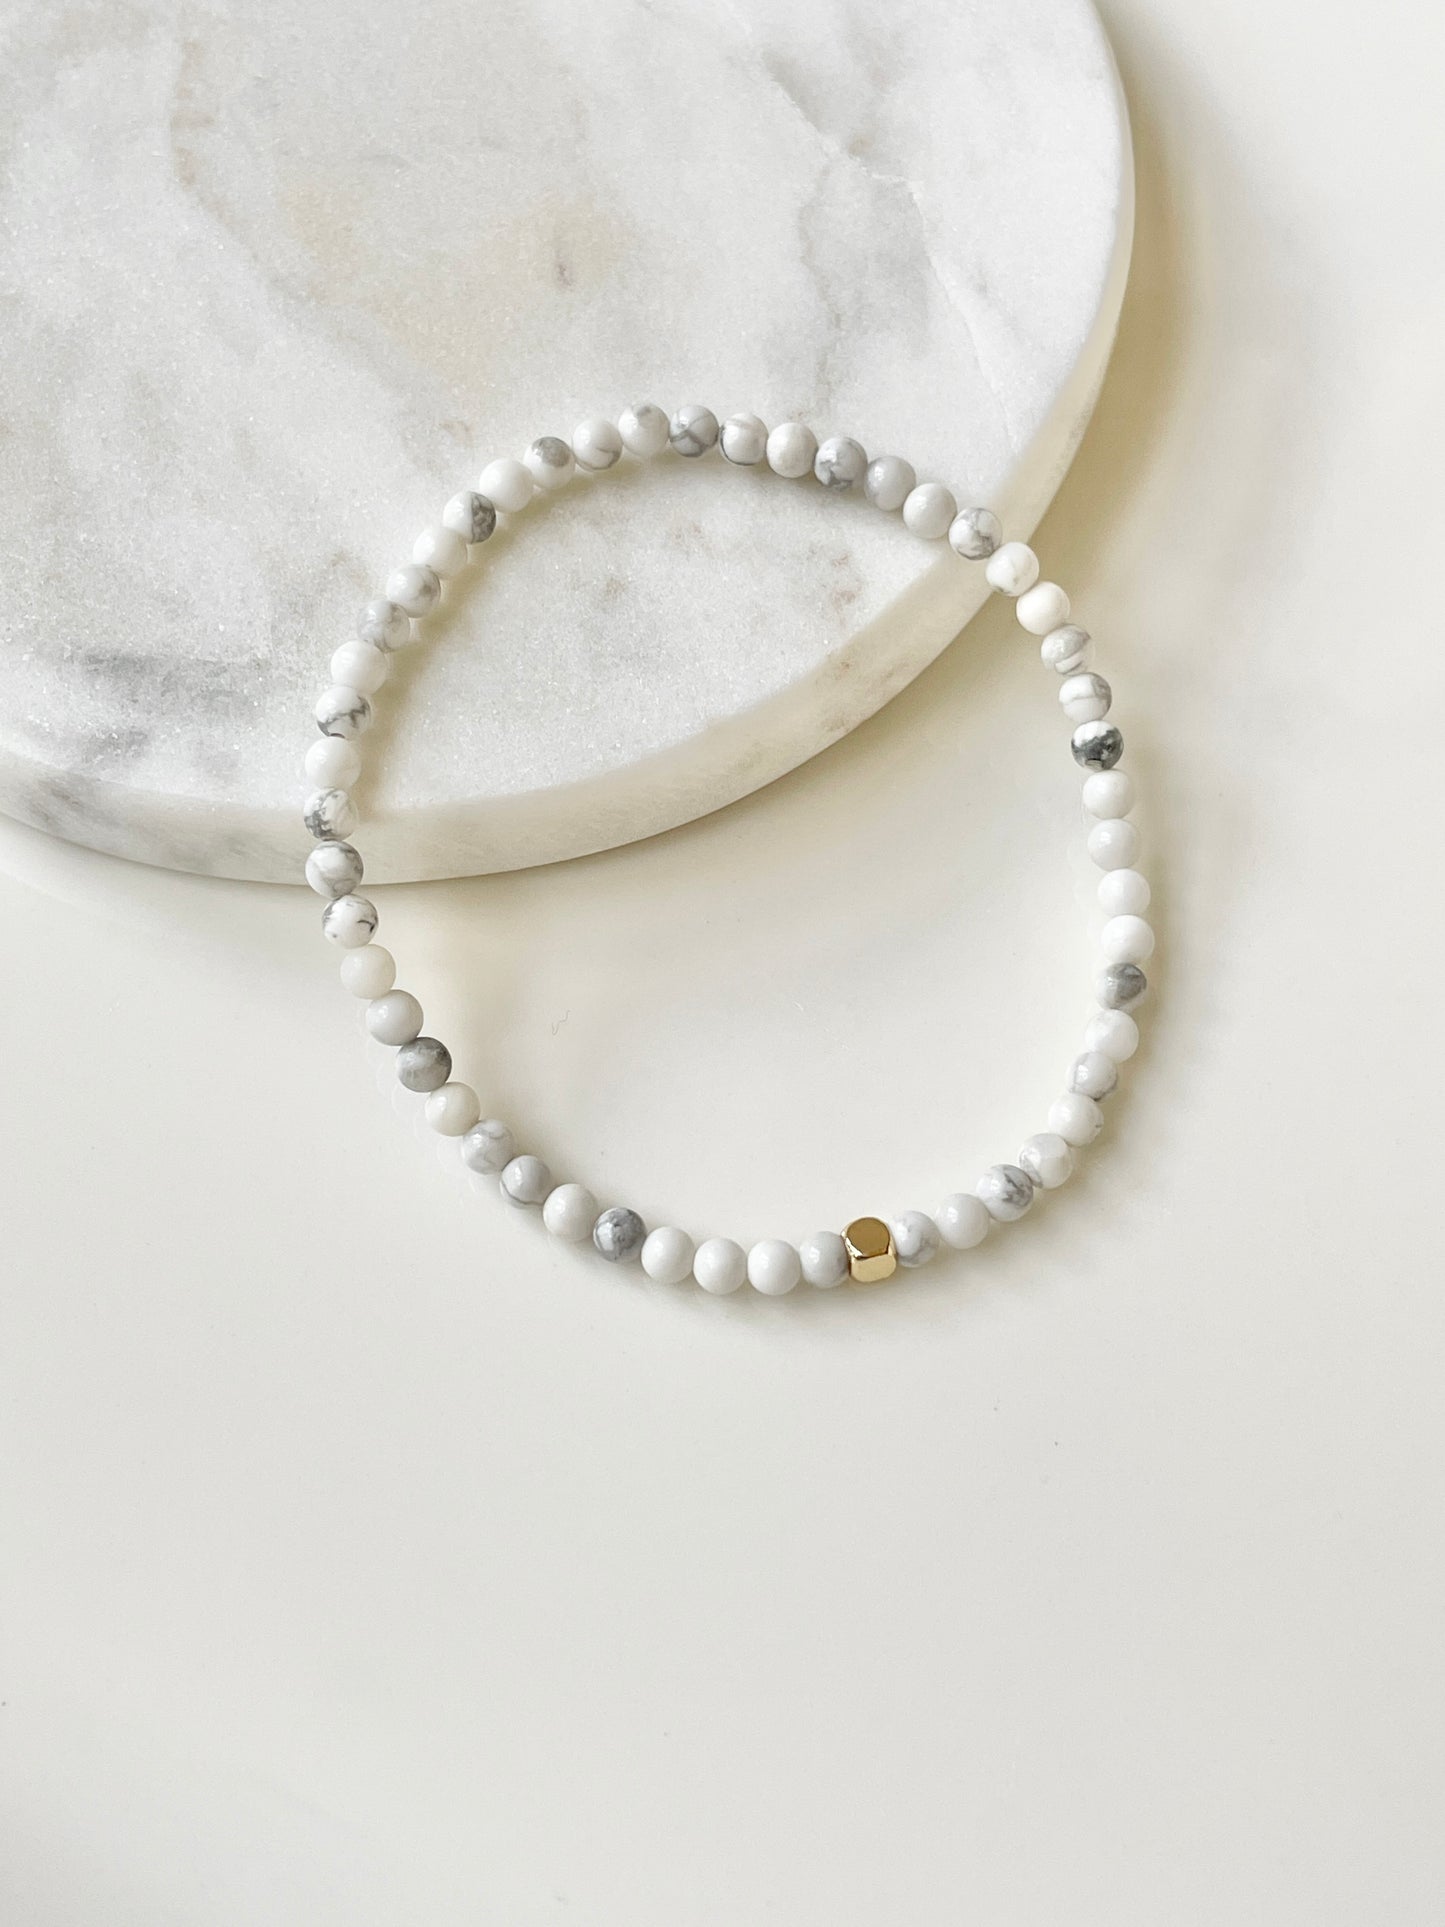 Dainty Howlite Bracelet, Single Gold Accent, For Tranquility